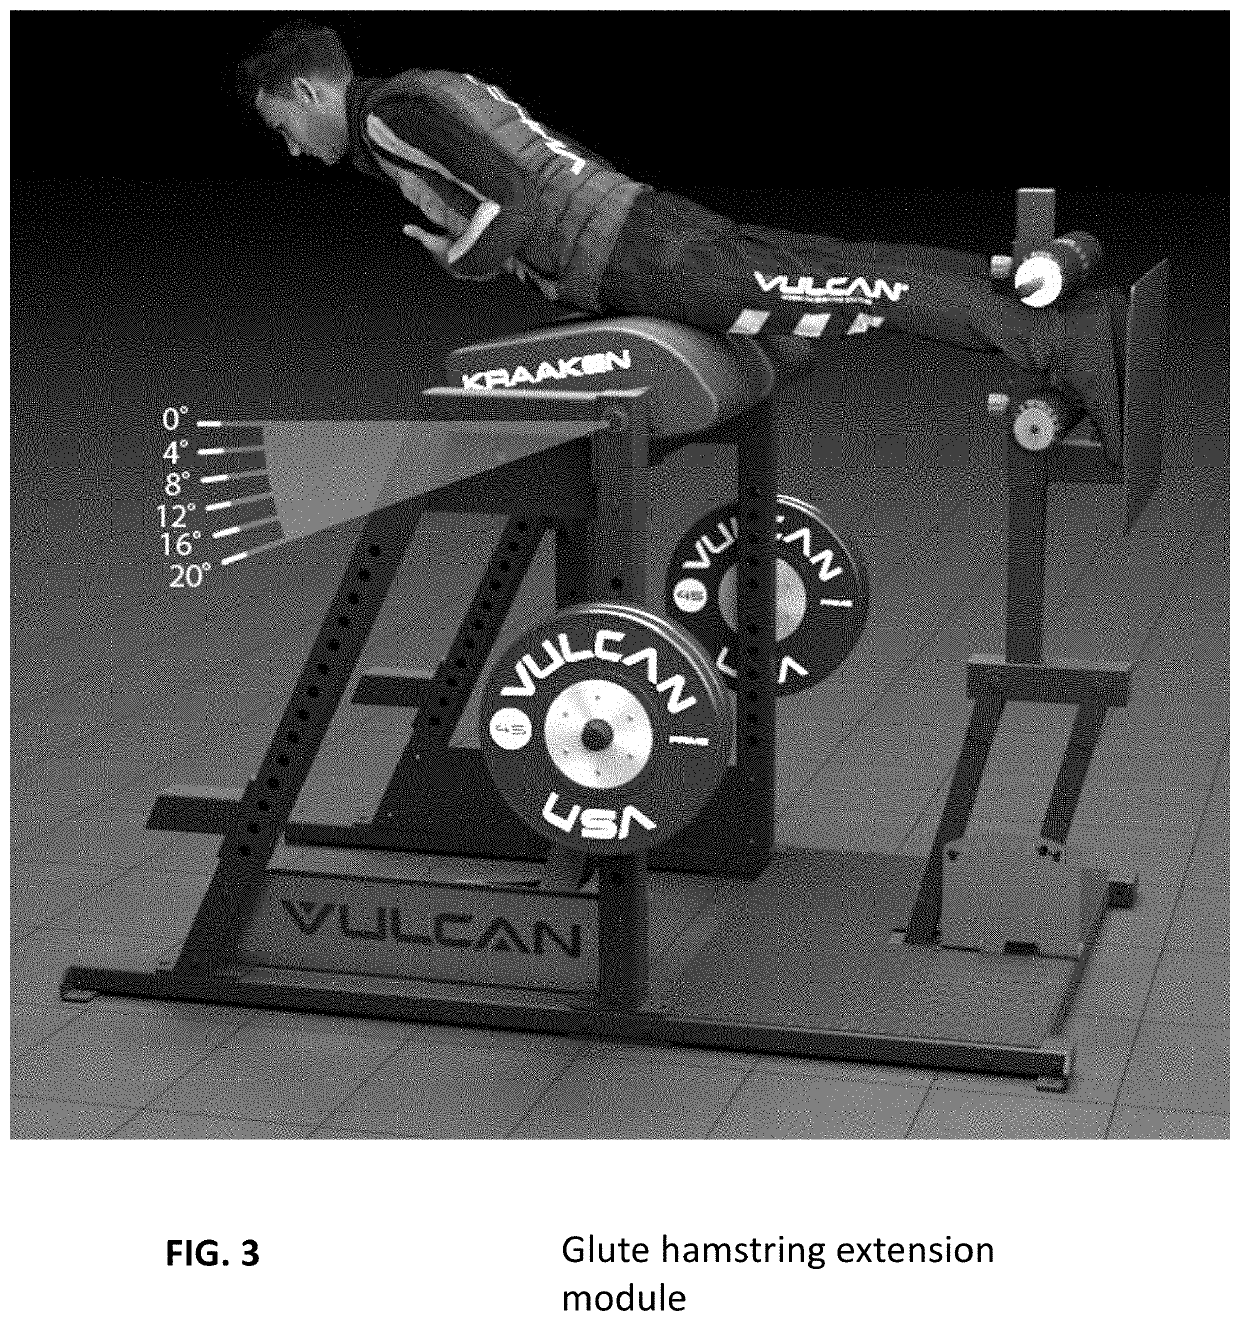 Exercise apparatus for training muscles